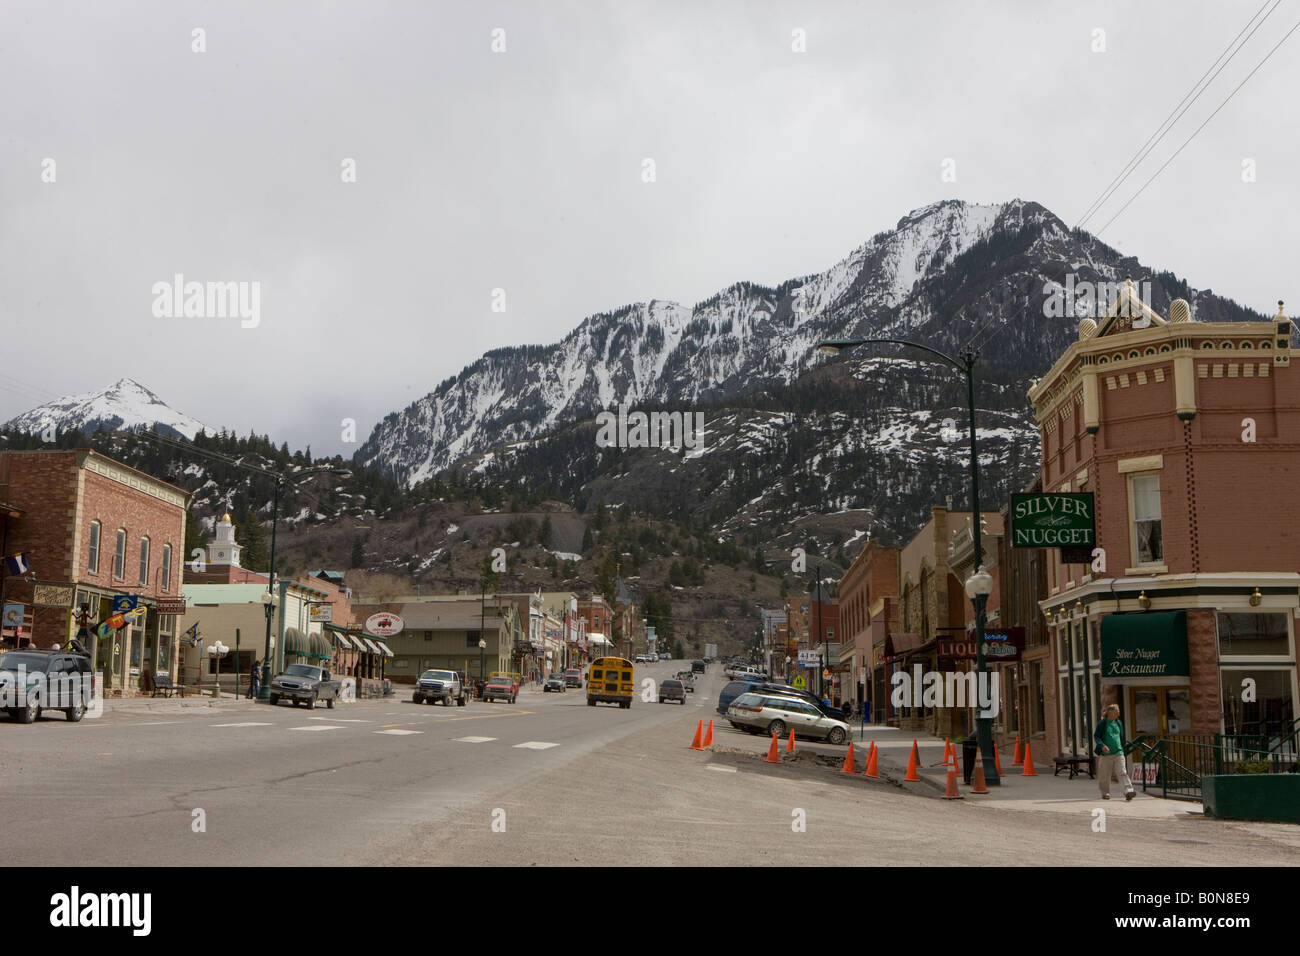 Shops line Main Street San Juan Skyway in Ouray Colorado small town nestled in the mountains nicknamed 'Switzerland of America' Stock Photo